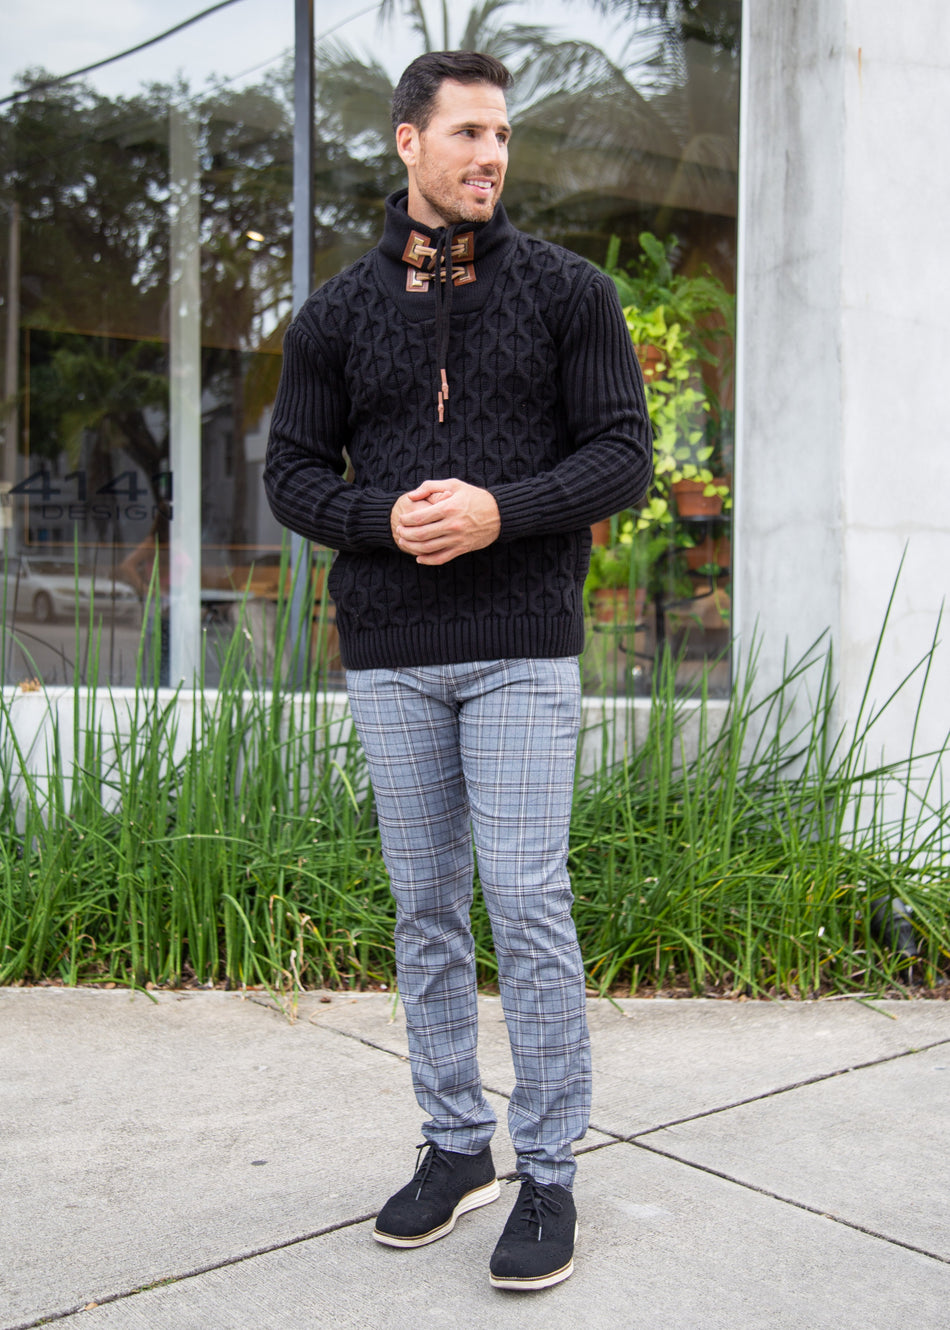 Quarter Zip Cable Knit Pullover Sweater Black